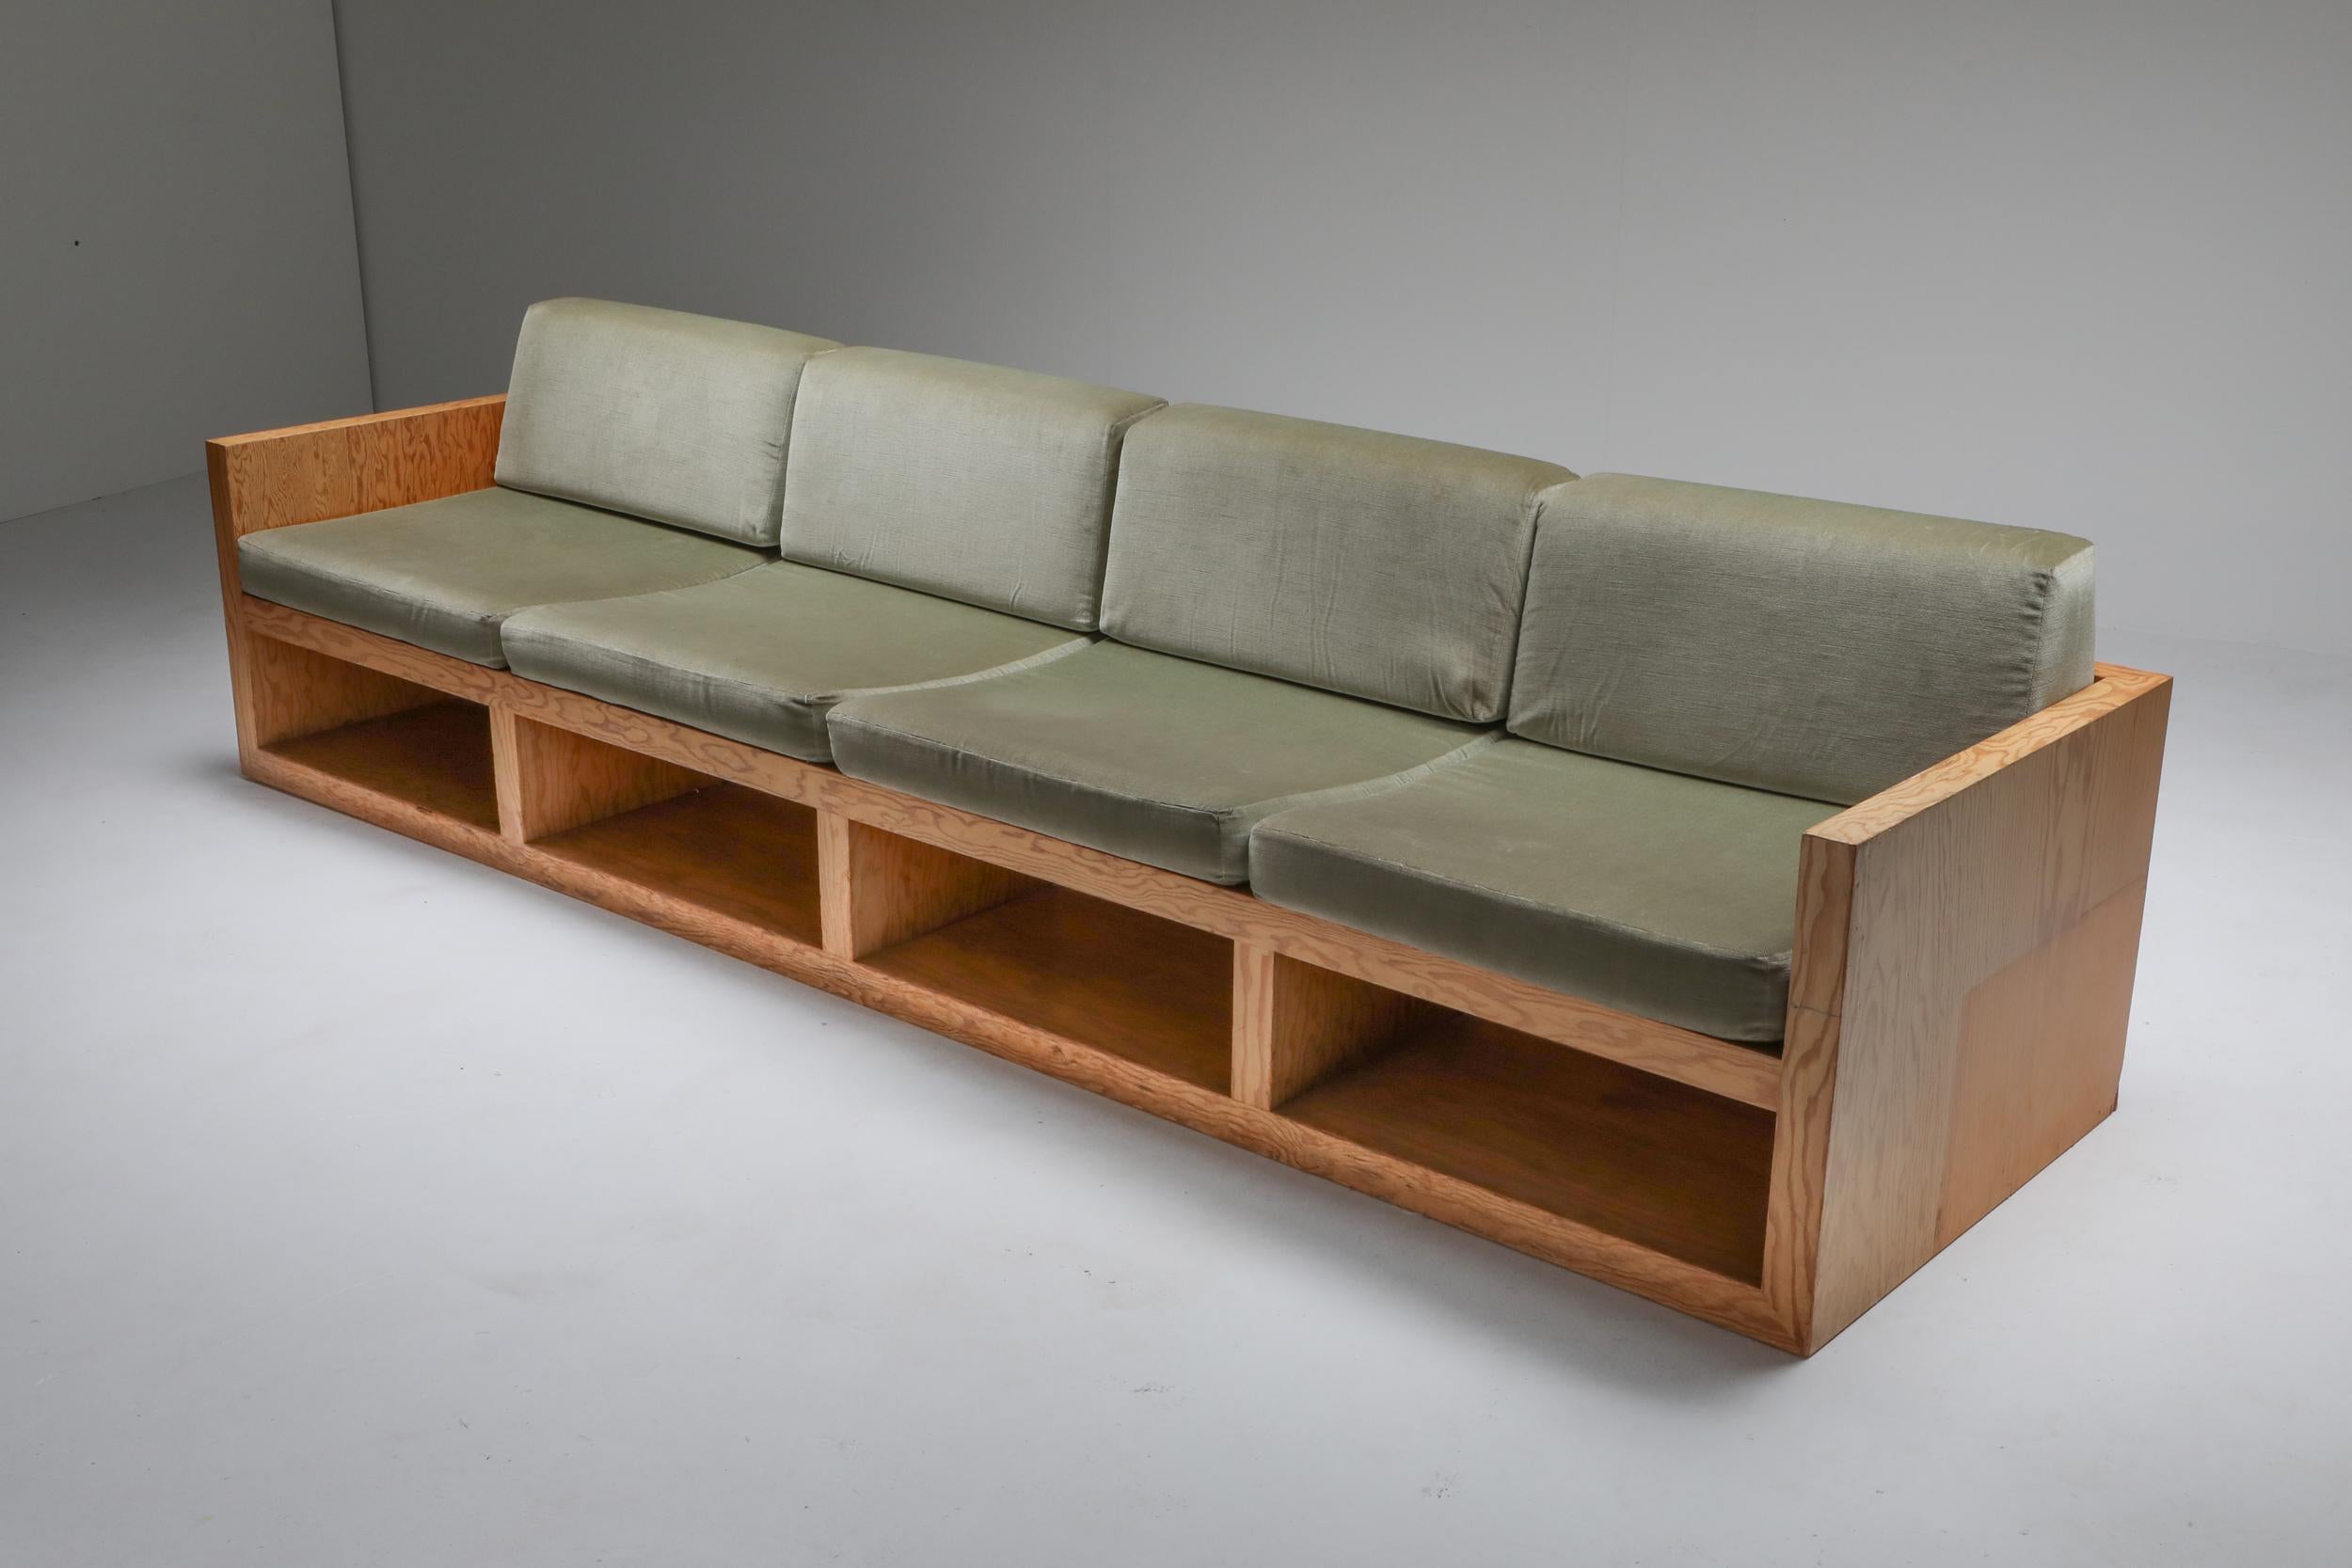 20th Century Mid-Century Modern Sofa in Pitch Pine and Velvet